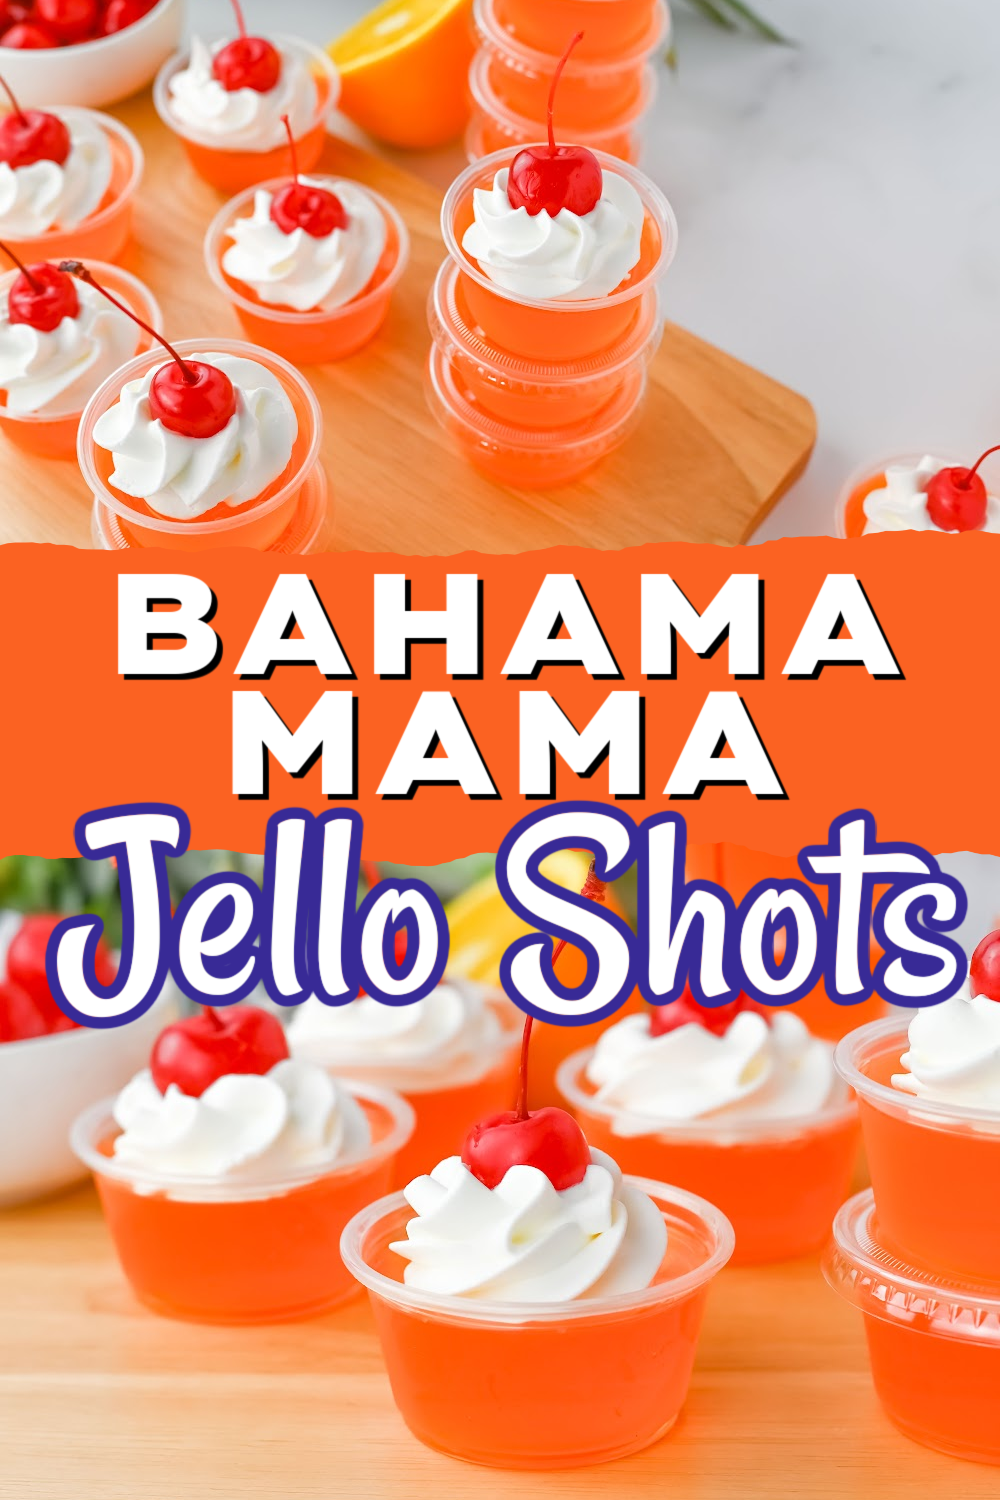 Double image pin image of Bahama Mama jello shots. Decorated with whipped cream and a cherry on top.